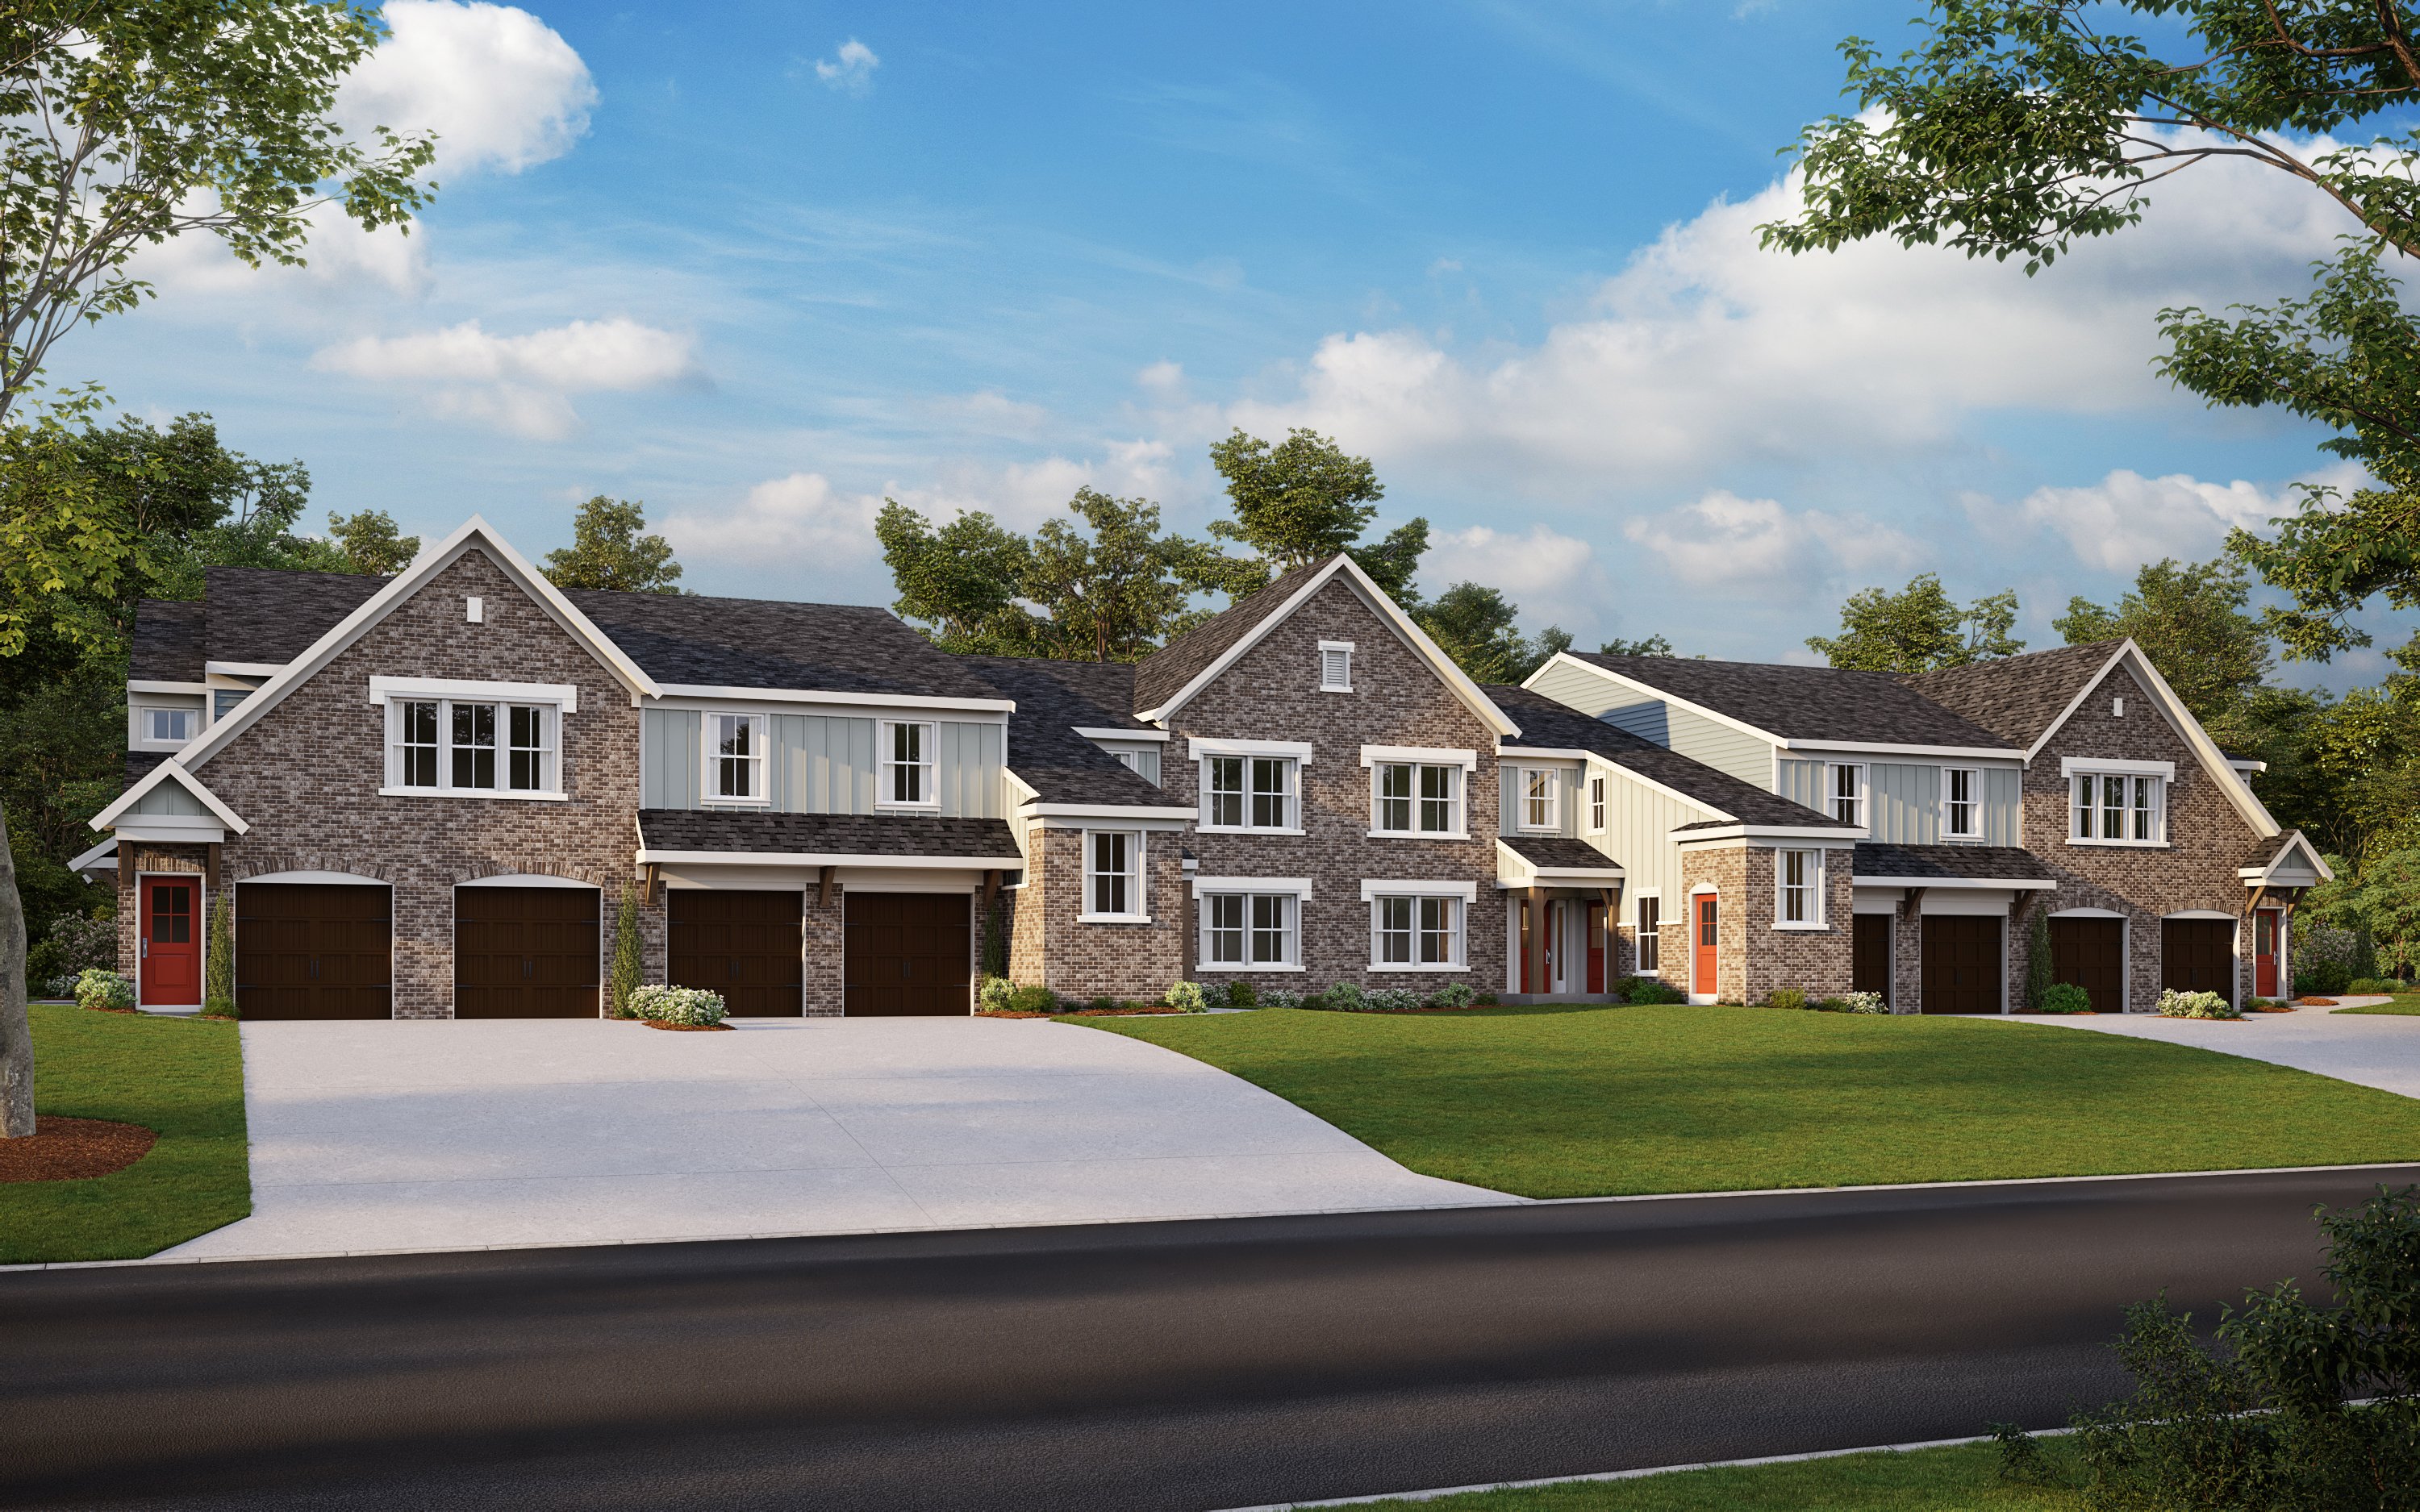 These new community features will be offered at our community the Hills at Crescent Springs, which is unveiling a new phase of Gallery II Condominiums. 